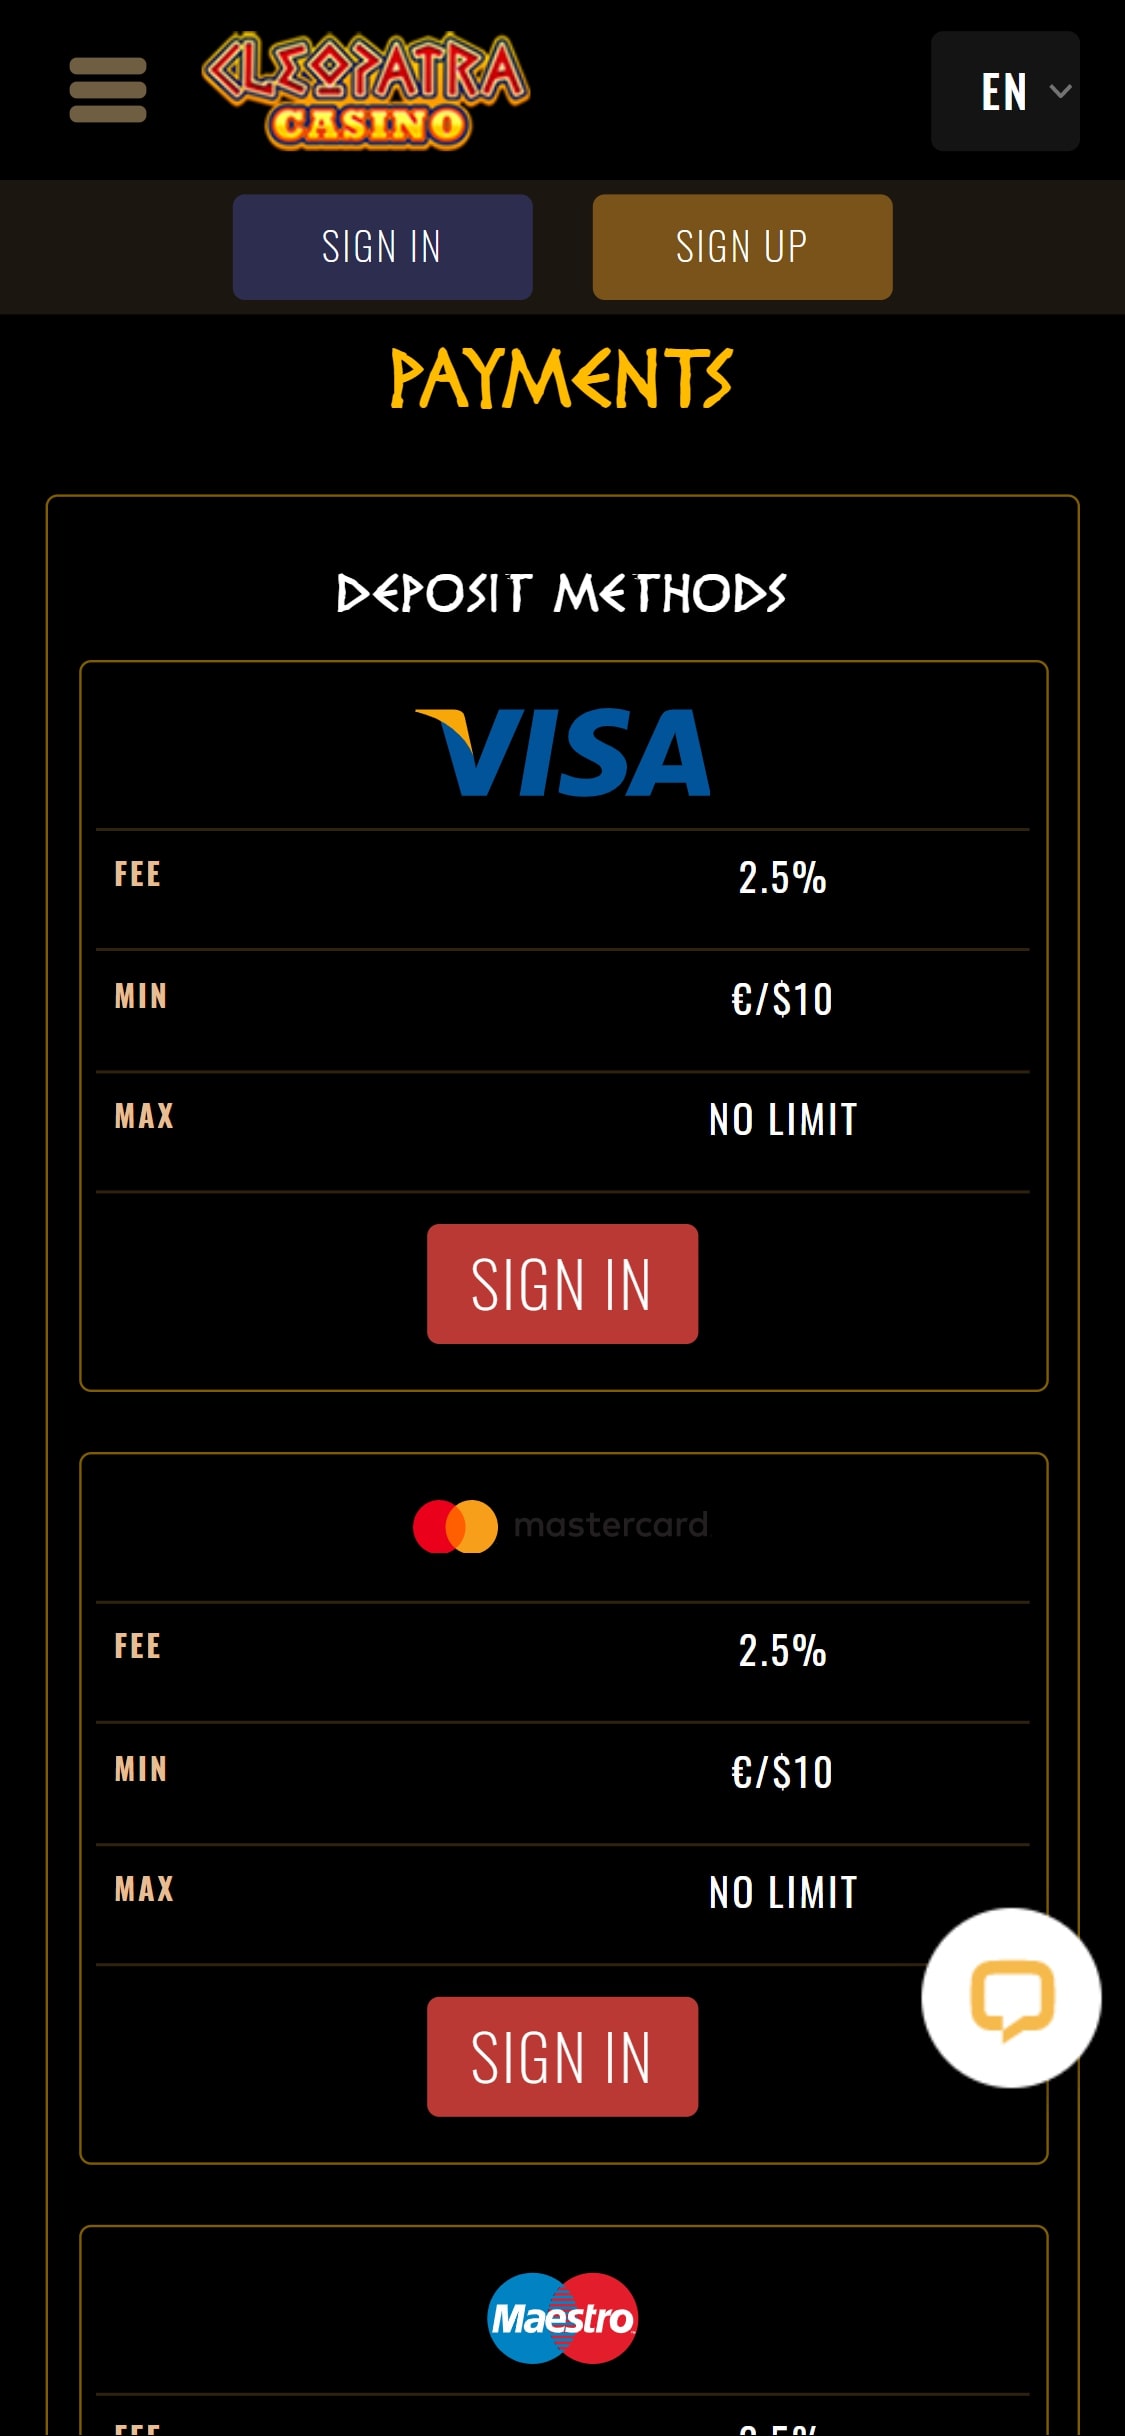 Cleopatra Casino Mobile Payment Methods Review